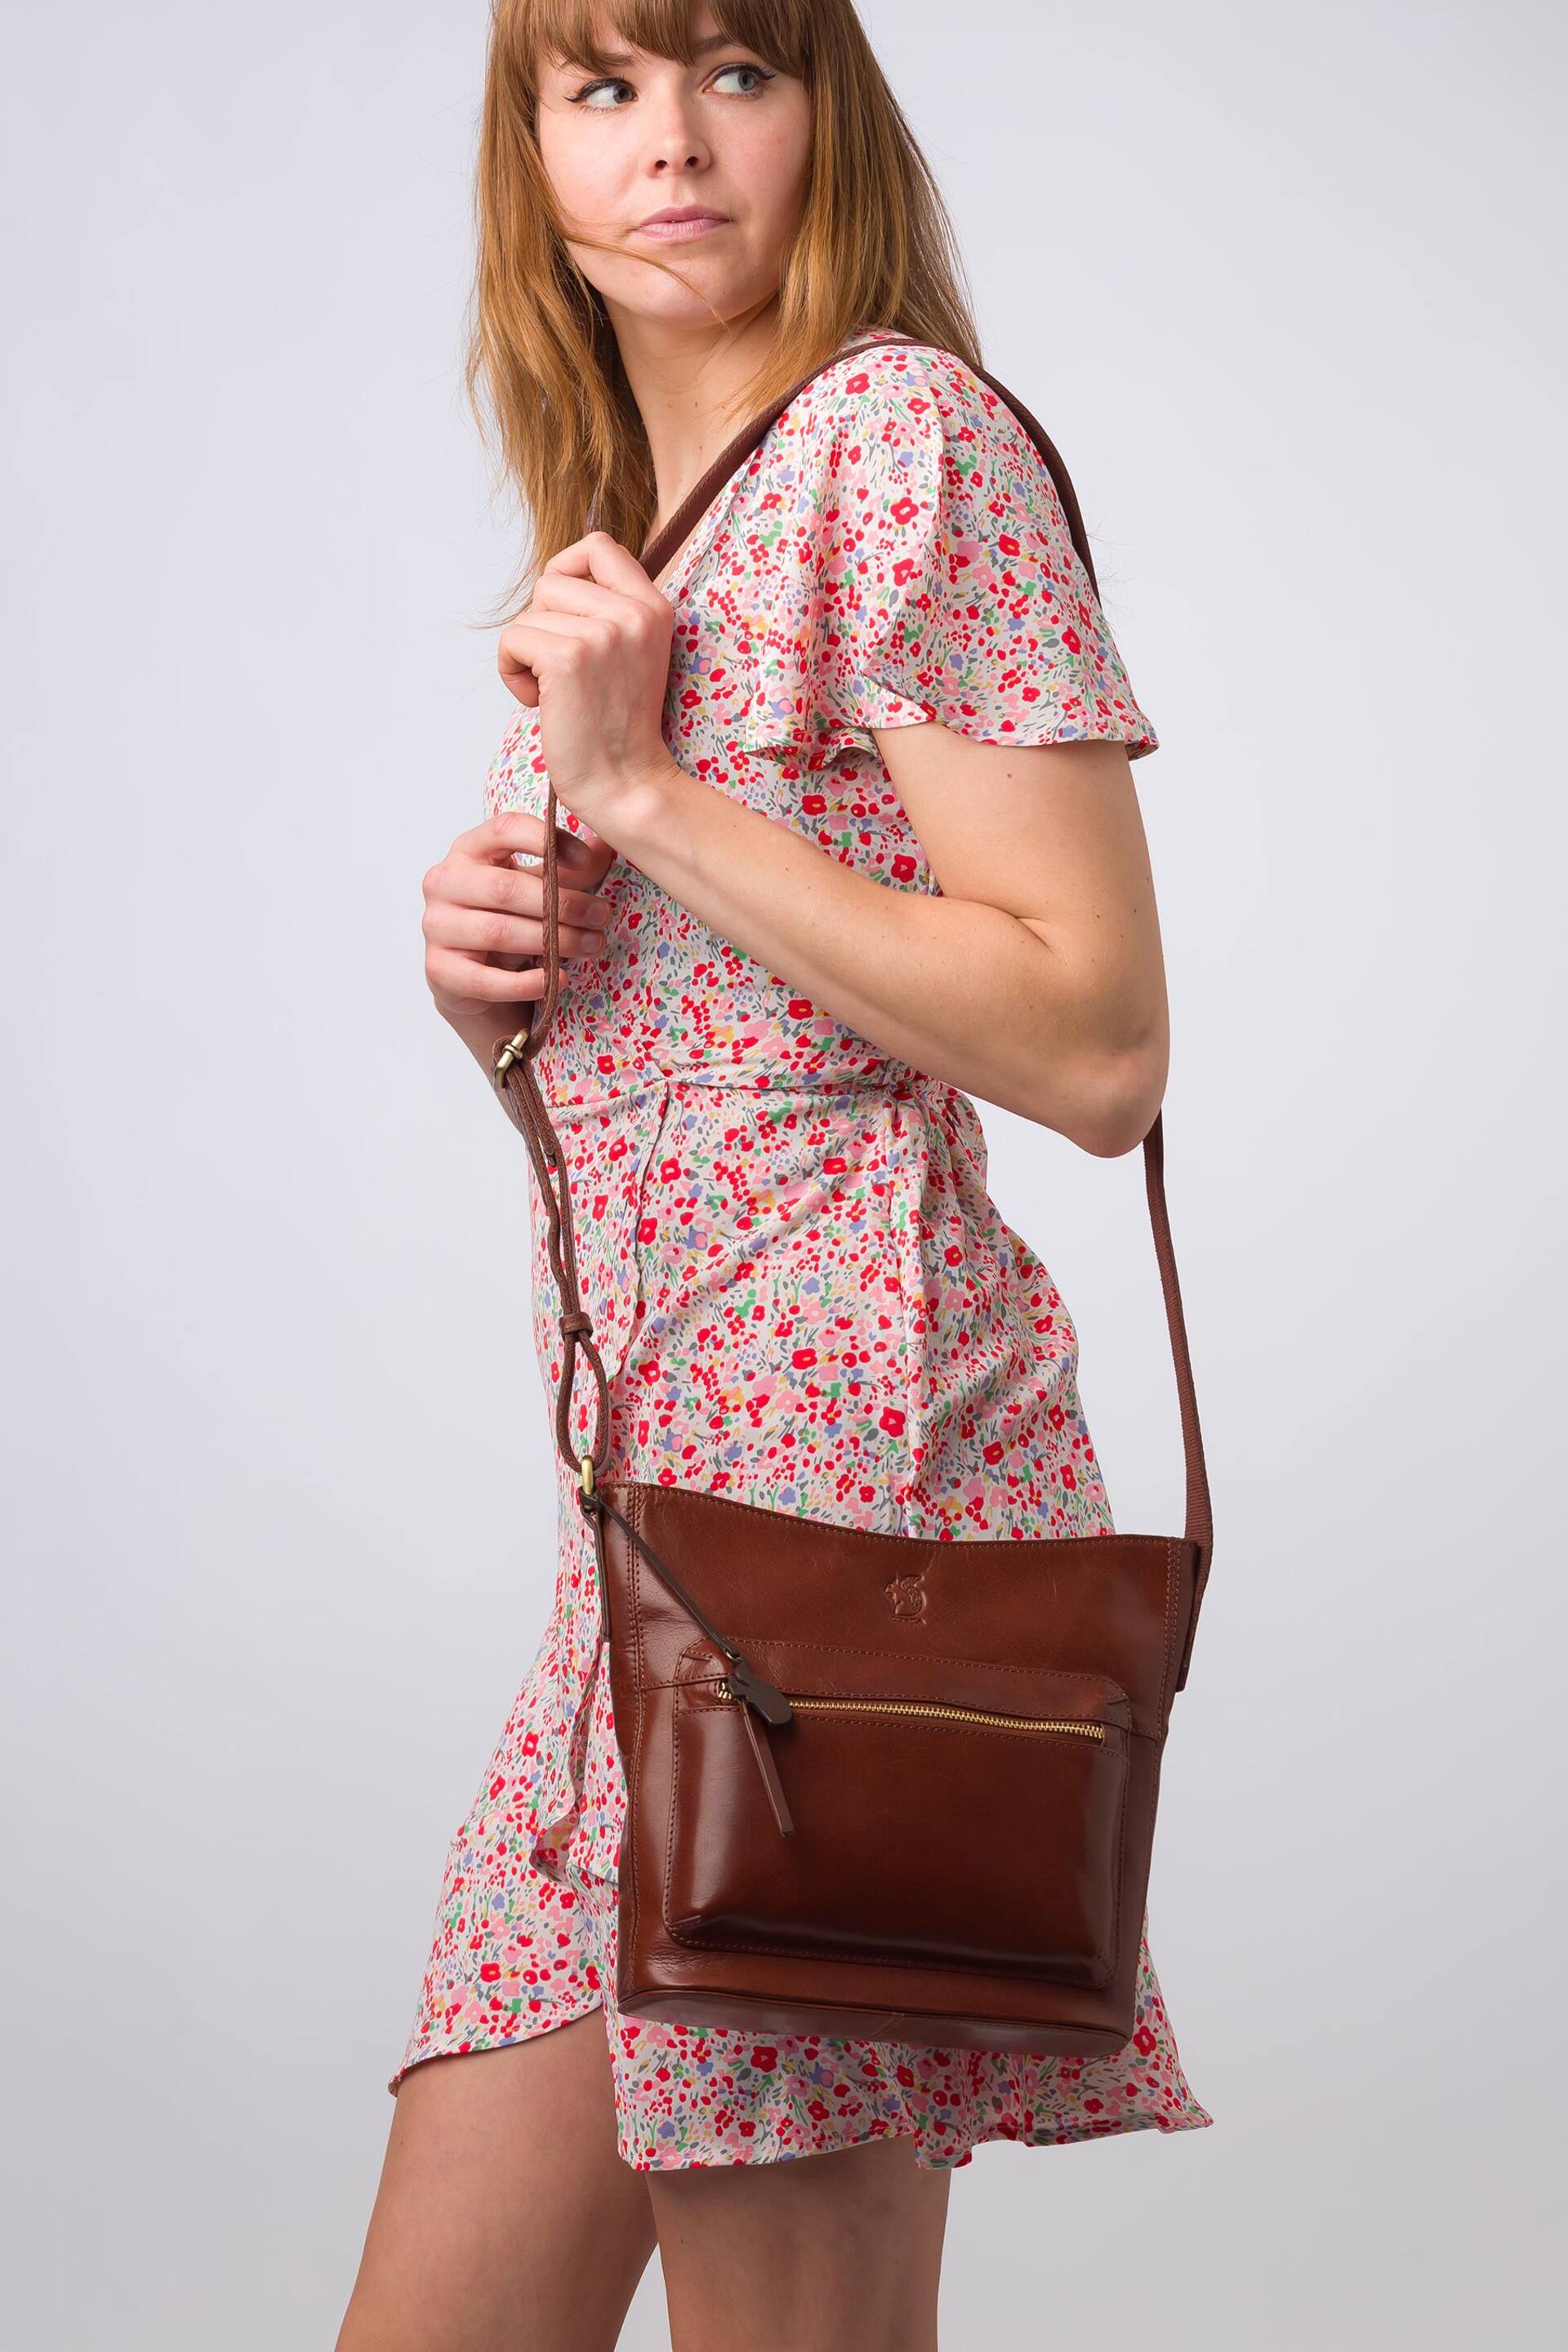 Conkca 'Liberty' Leather Shoulder Bag - Image 2 of 7